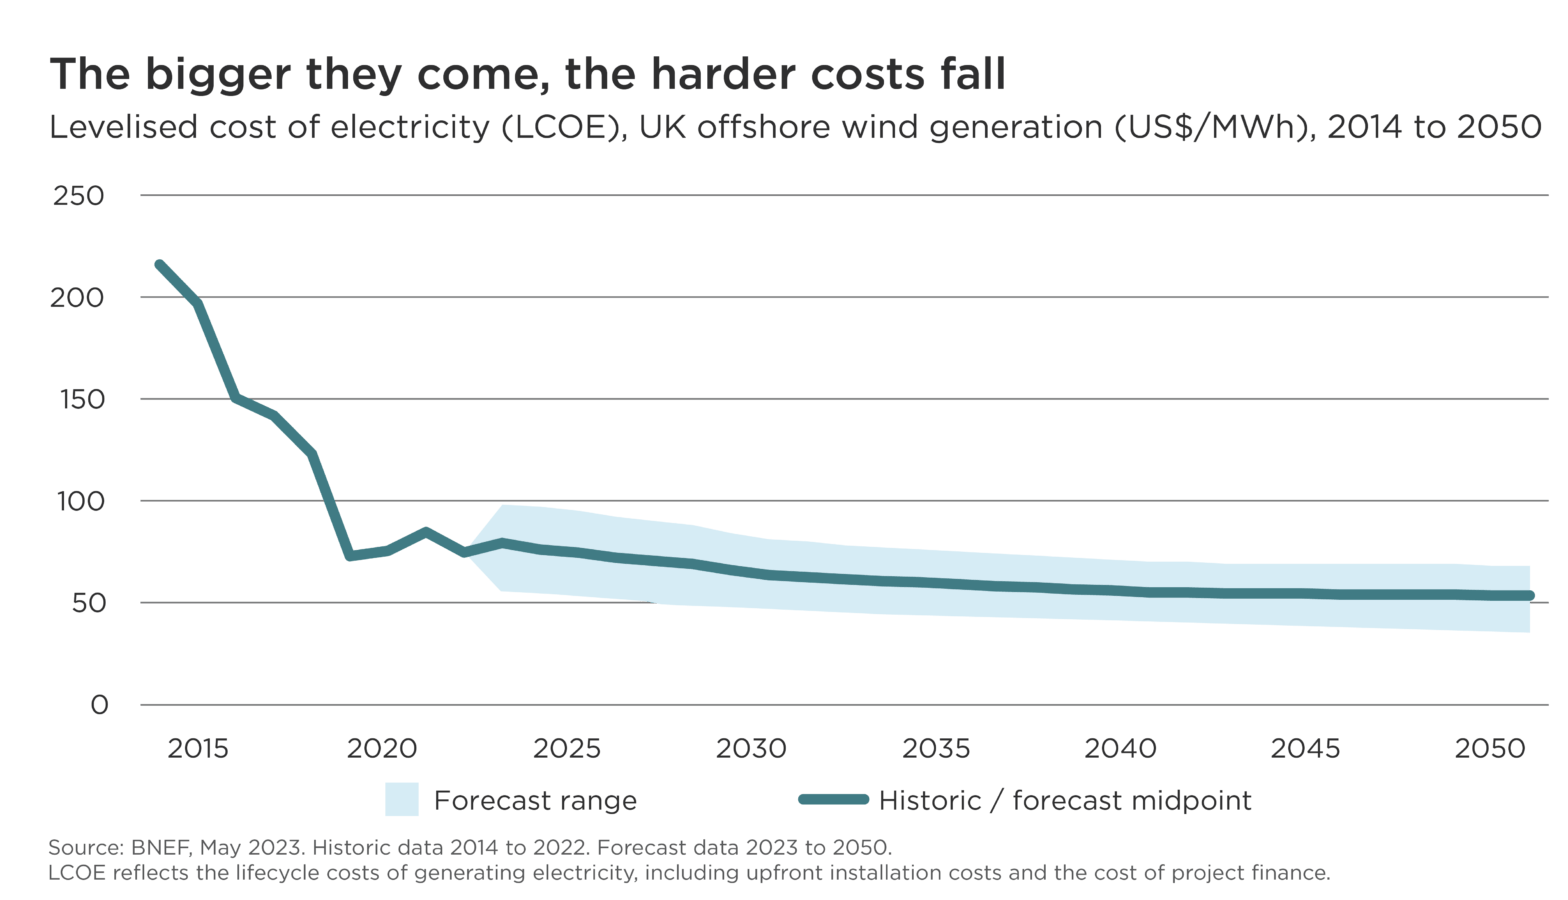 Chart of levelised cost of electricity UK offshore wind generation 2014 to 2050